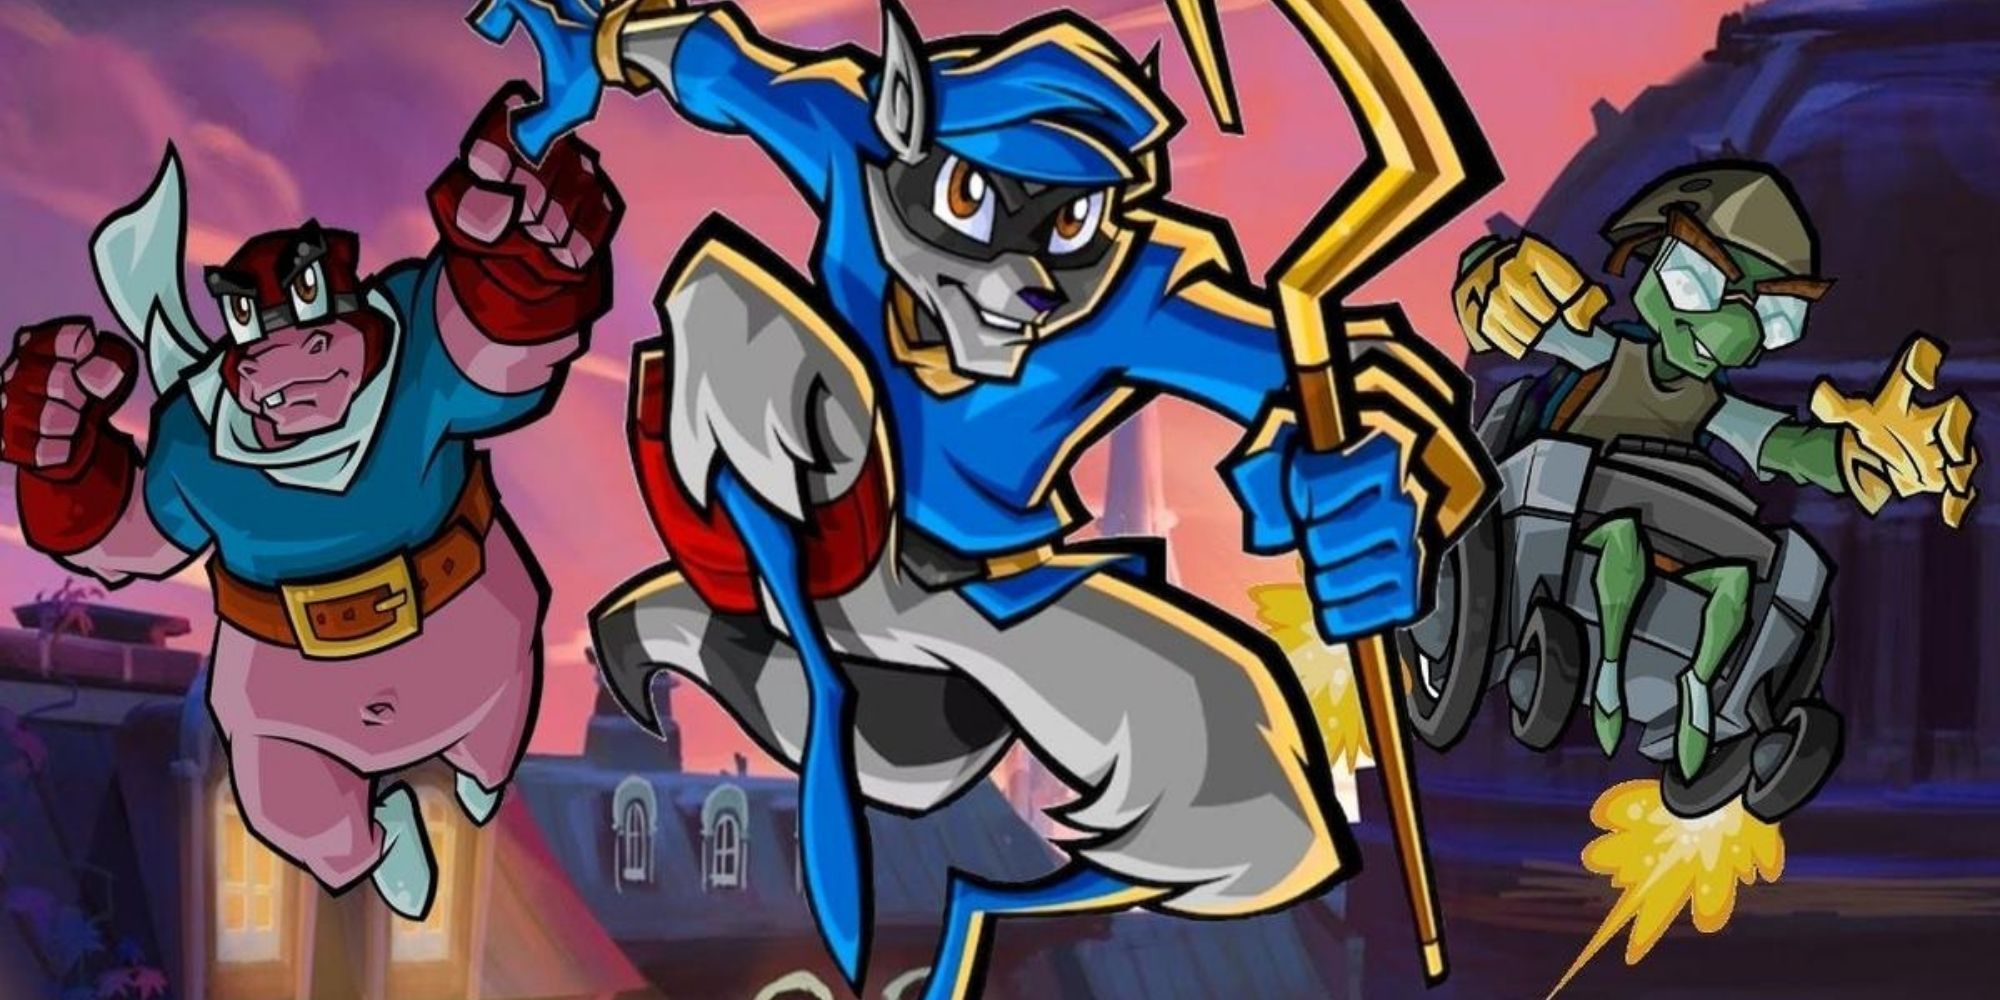 Kabelbane færdig Furnace Sly Cooper Returns To PS Plus In Premium Classics Update